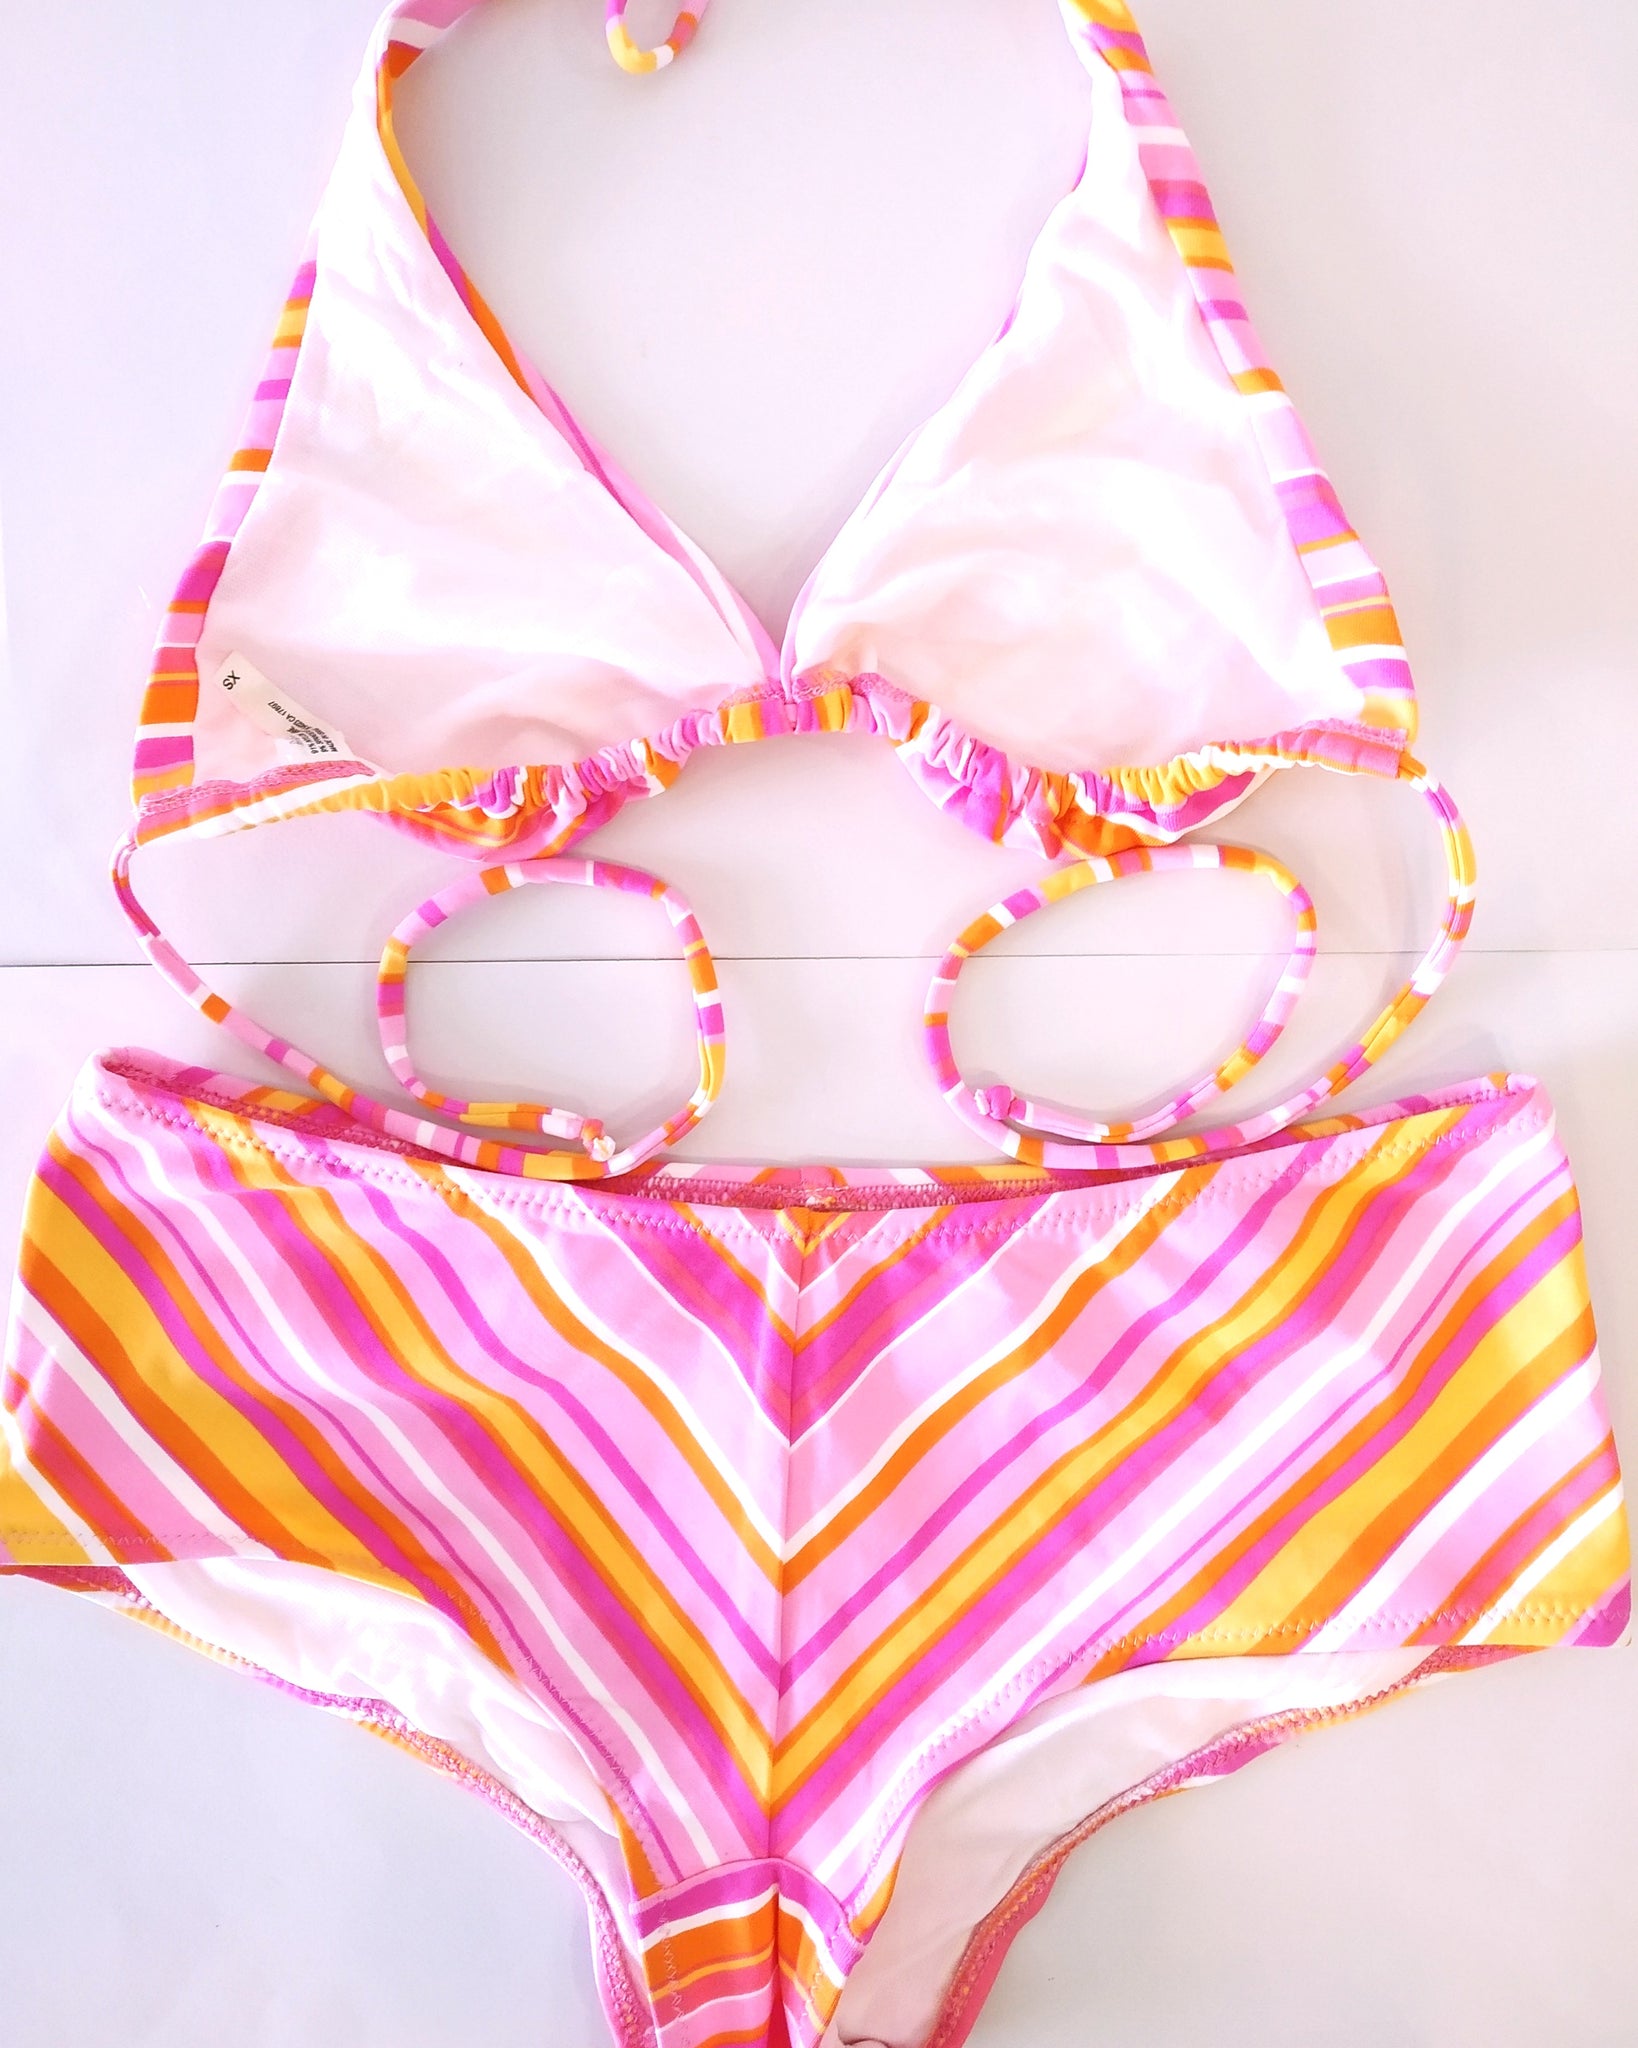 bikini set pastel-colored stripes pattern with large size of shorty bikini bottom and triangle halter bikini bra, with a short stretchy pink pareo spread on white background